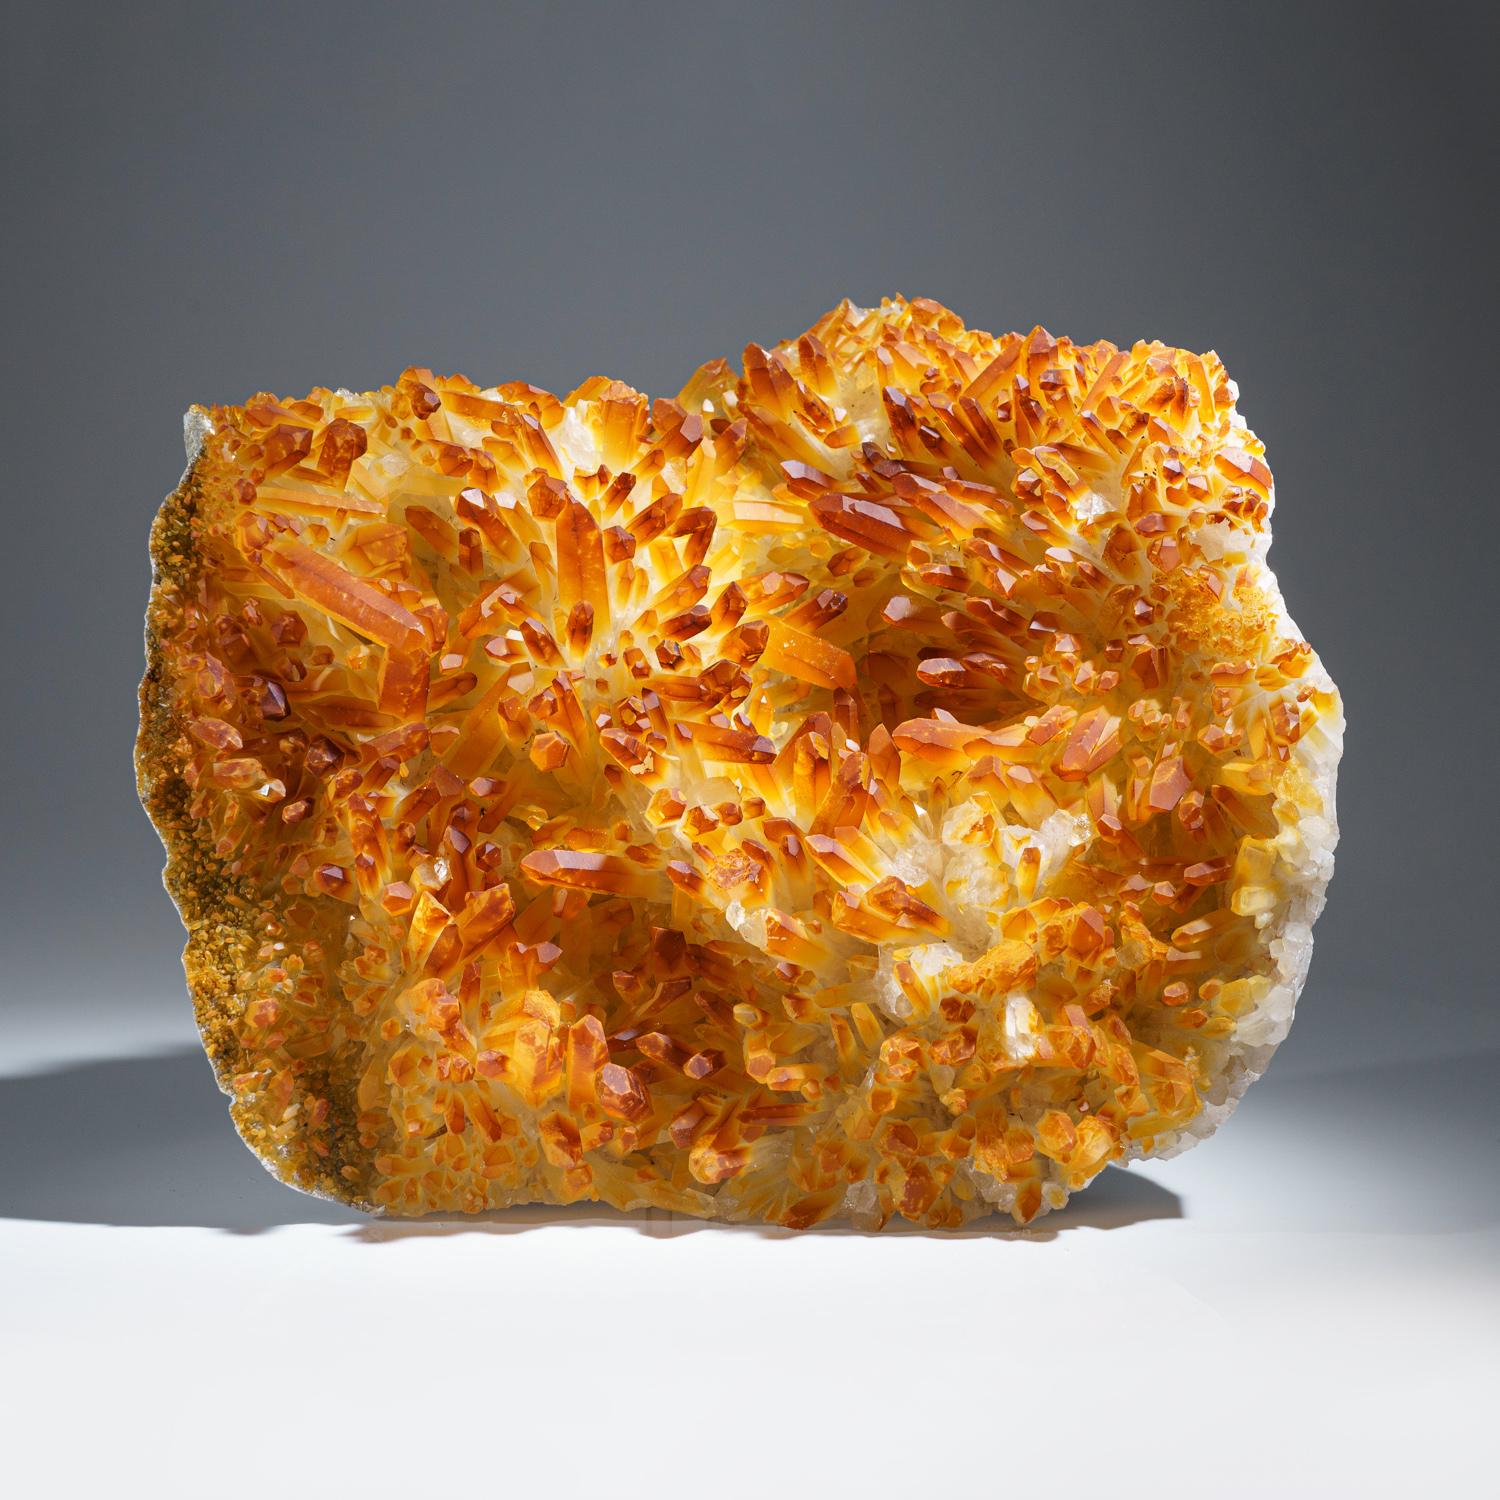 A large cluster of rare orange tangerine quartz crystals. These rare quartz clusters are only found in this region of the world. A hemotite oxidate within the quartz has created the orange color. These specimens are all-natural, extremely rare and